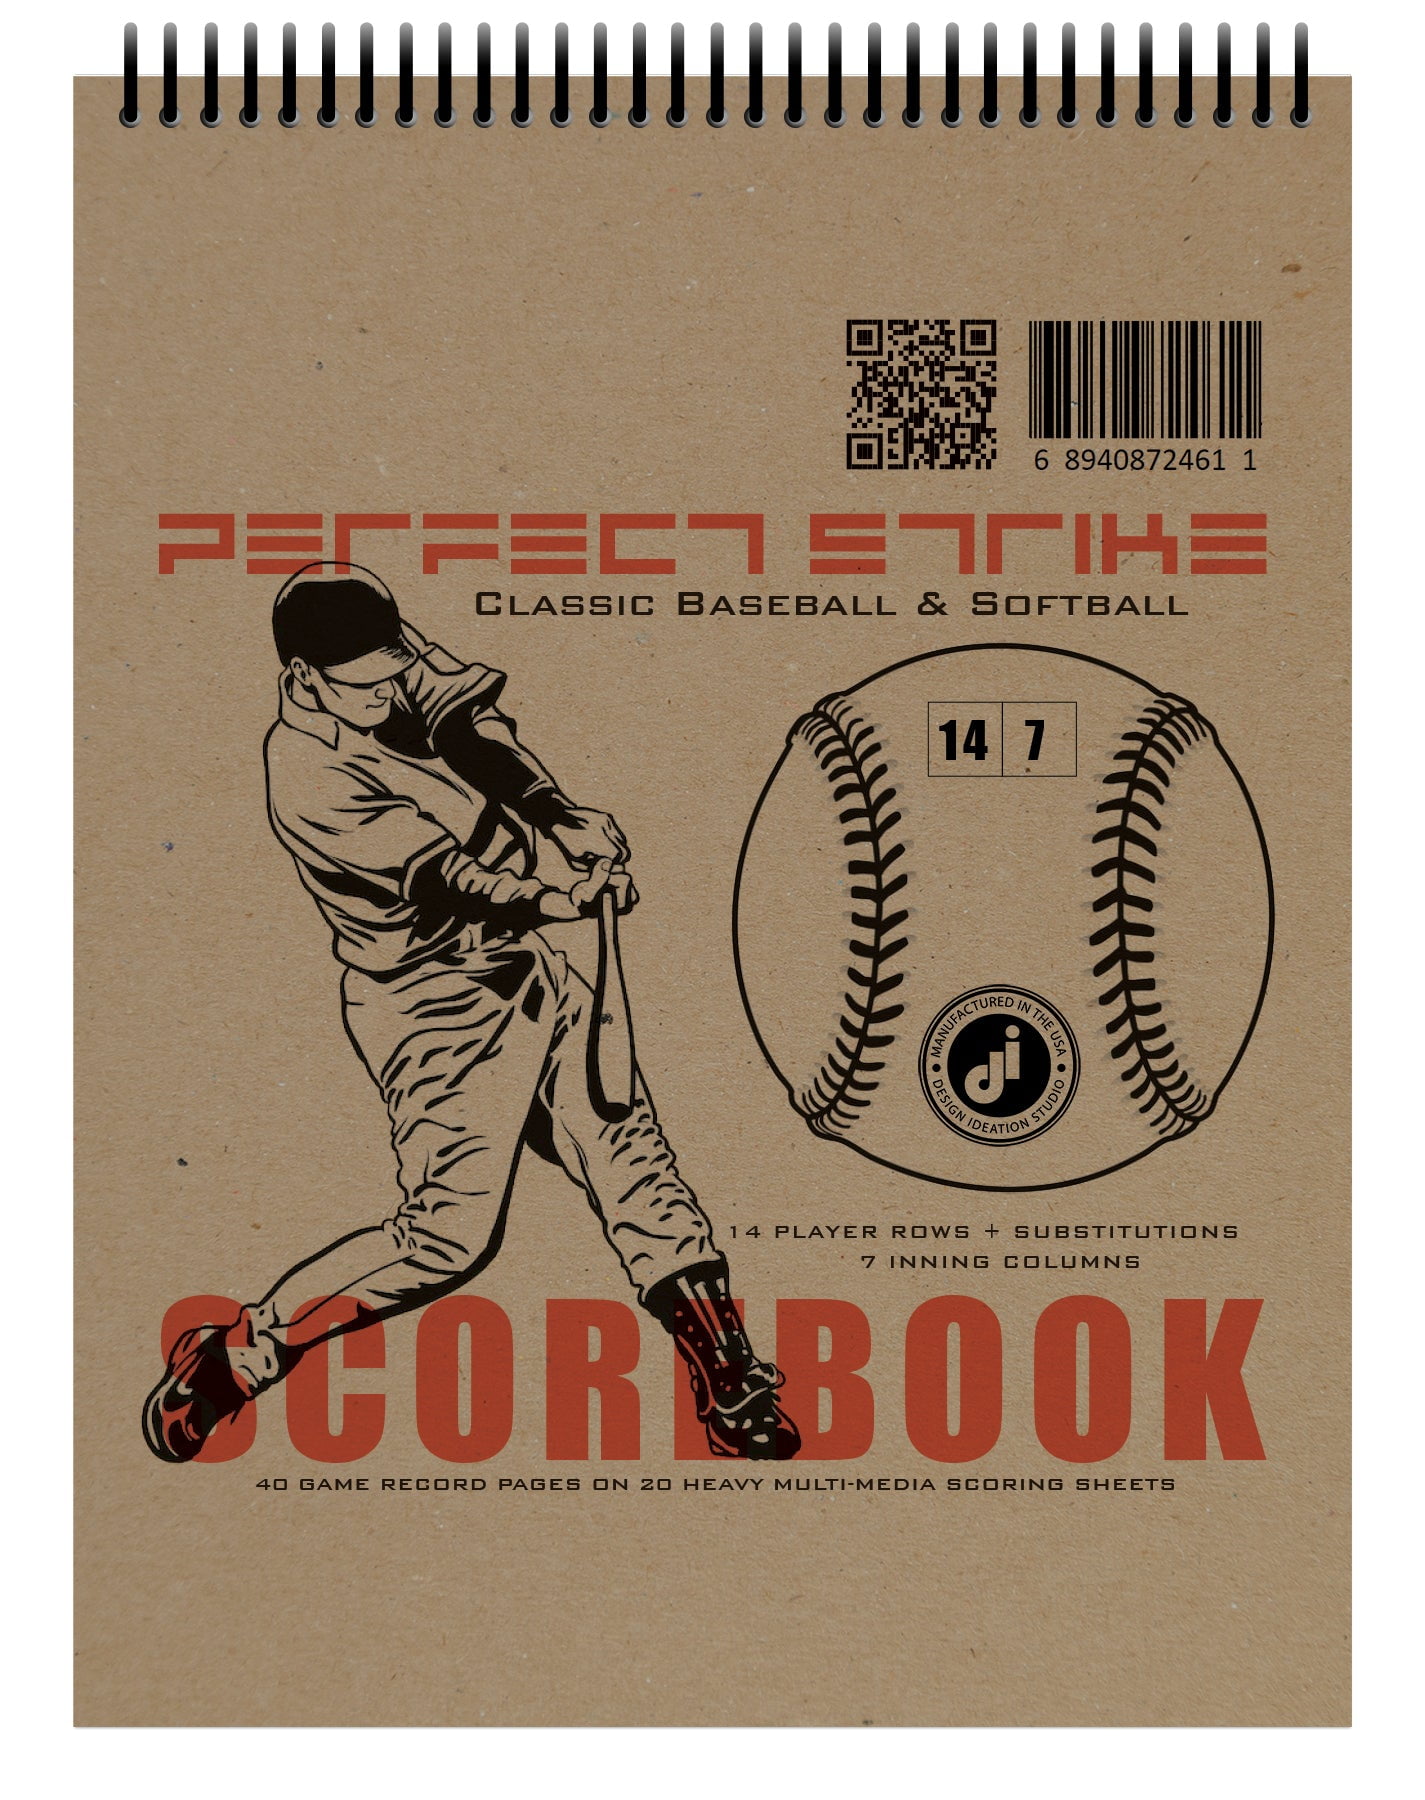 Perfect Strike Baseball Scorebook with Rules and Scoring Instructions Heavy Duty Score keeping Book